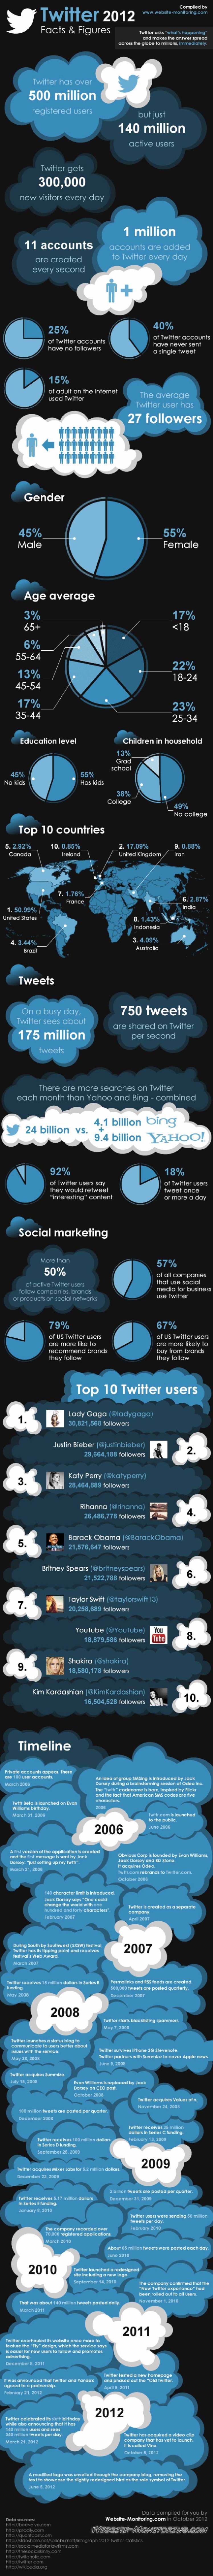 Twitter Stats Infographic